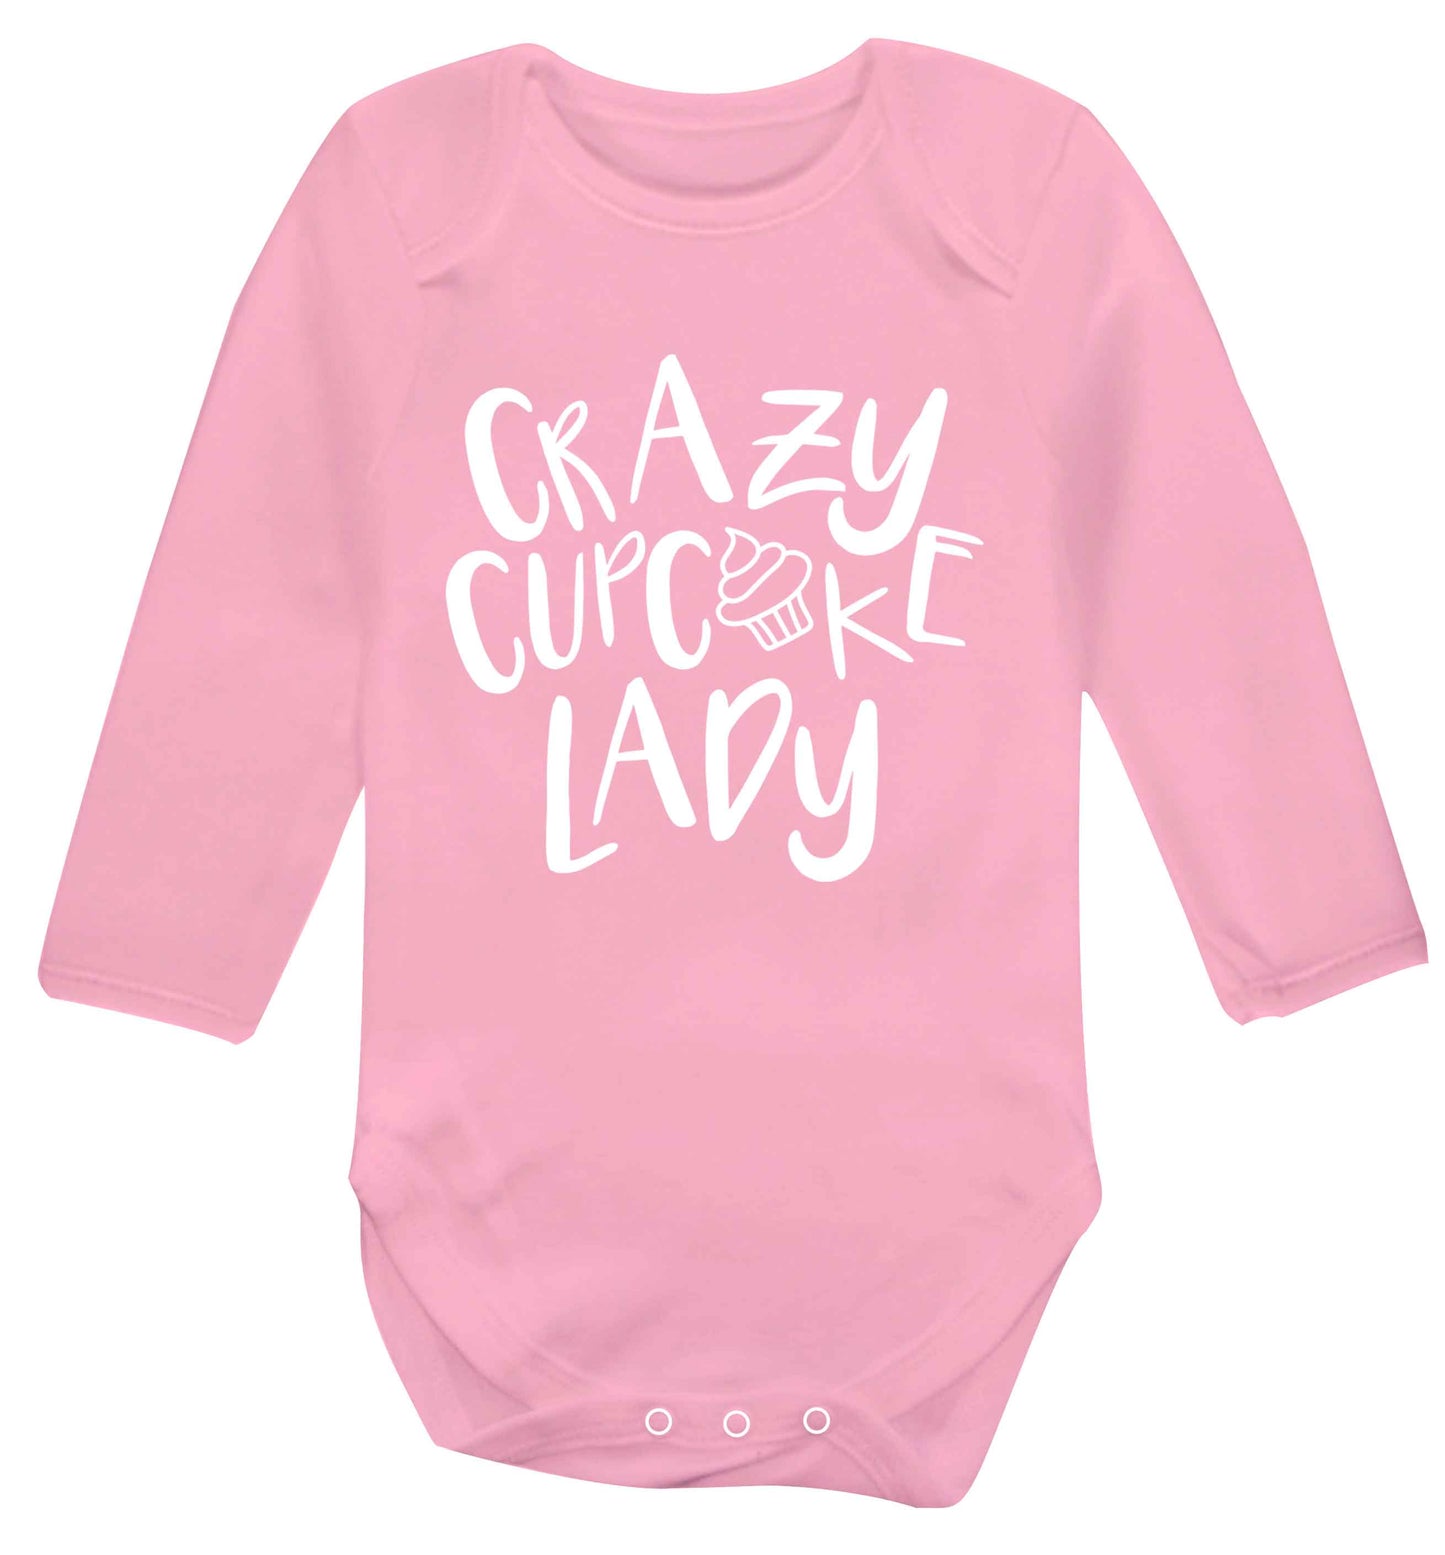 Crazy cupcake lady Baby Vest long sleeved pale pink 6-12 months